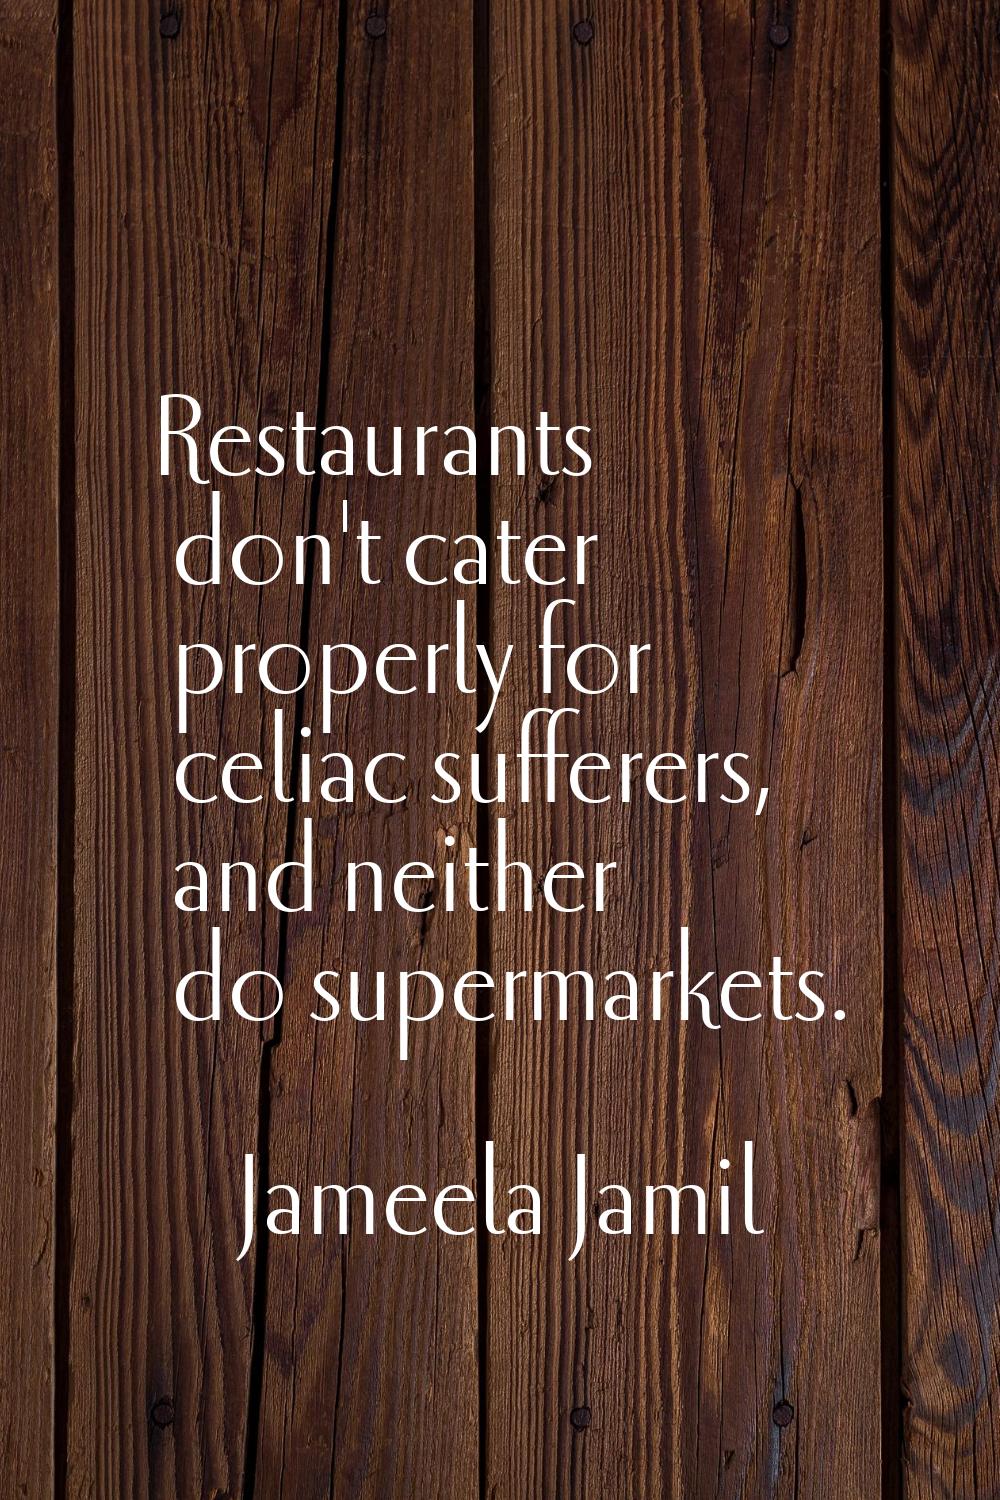 Restaurants don't cater properly for celiac sufferers, and neither do supermarkets.